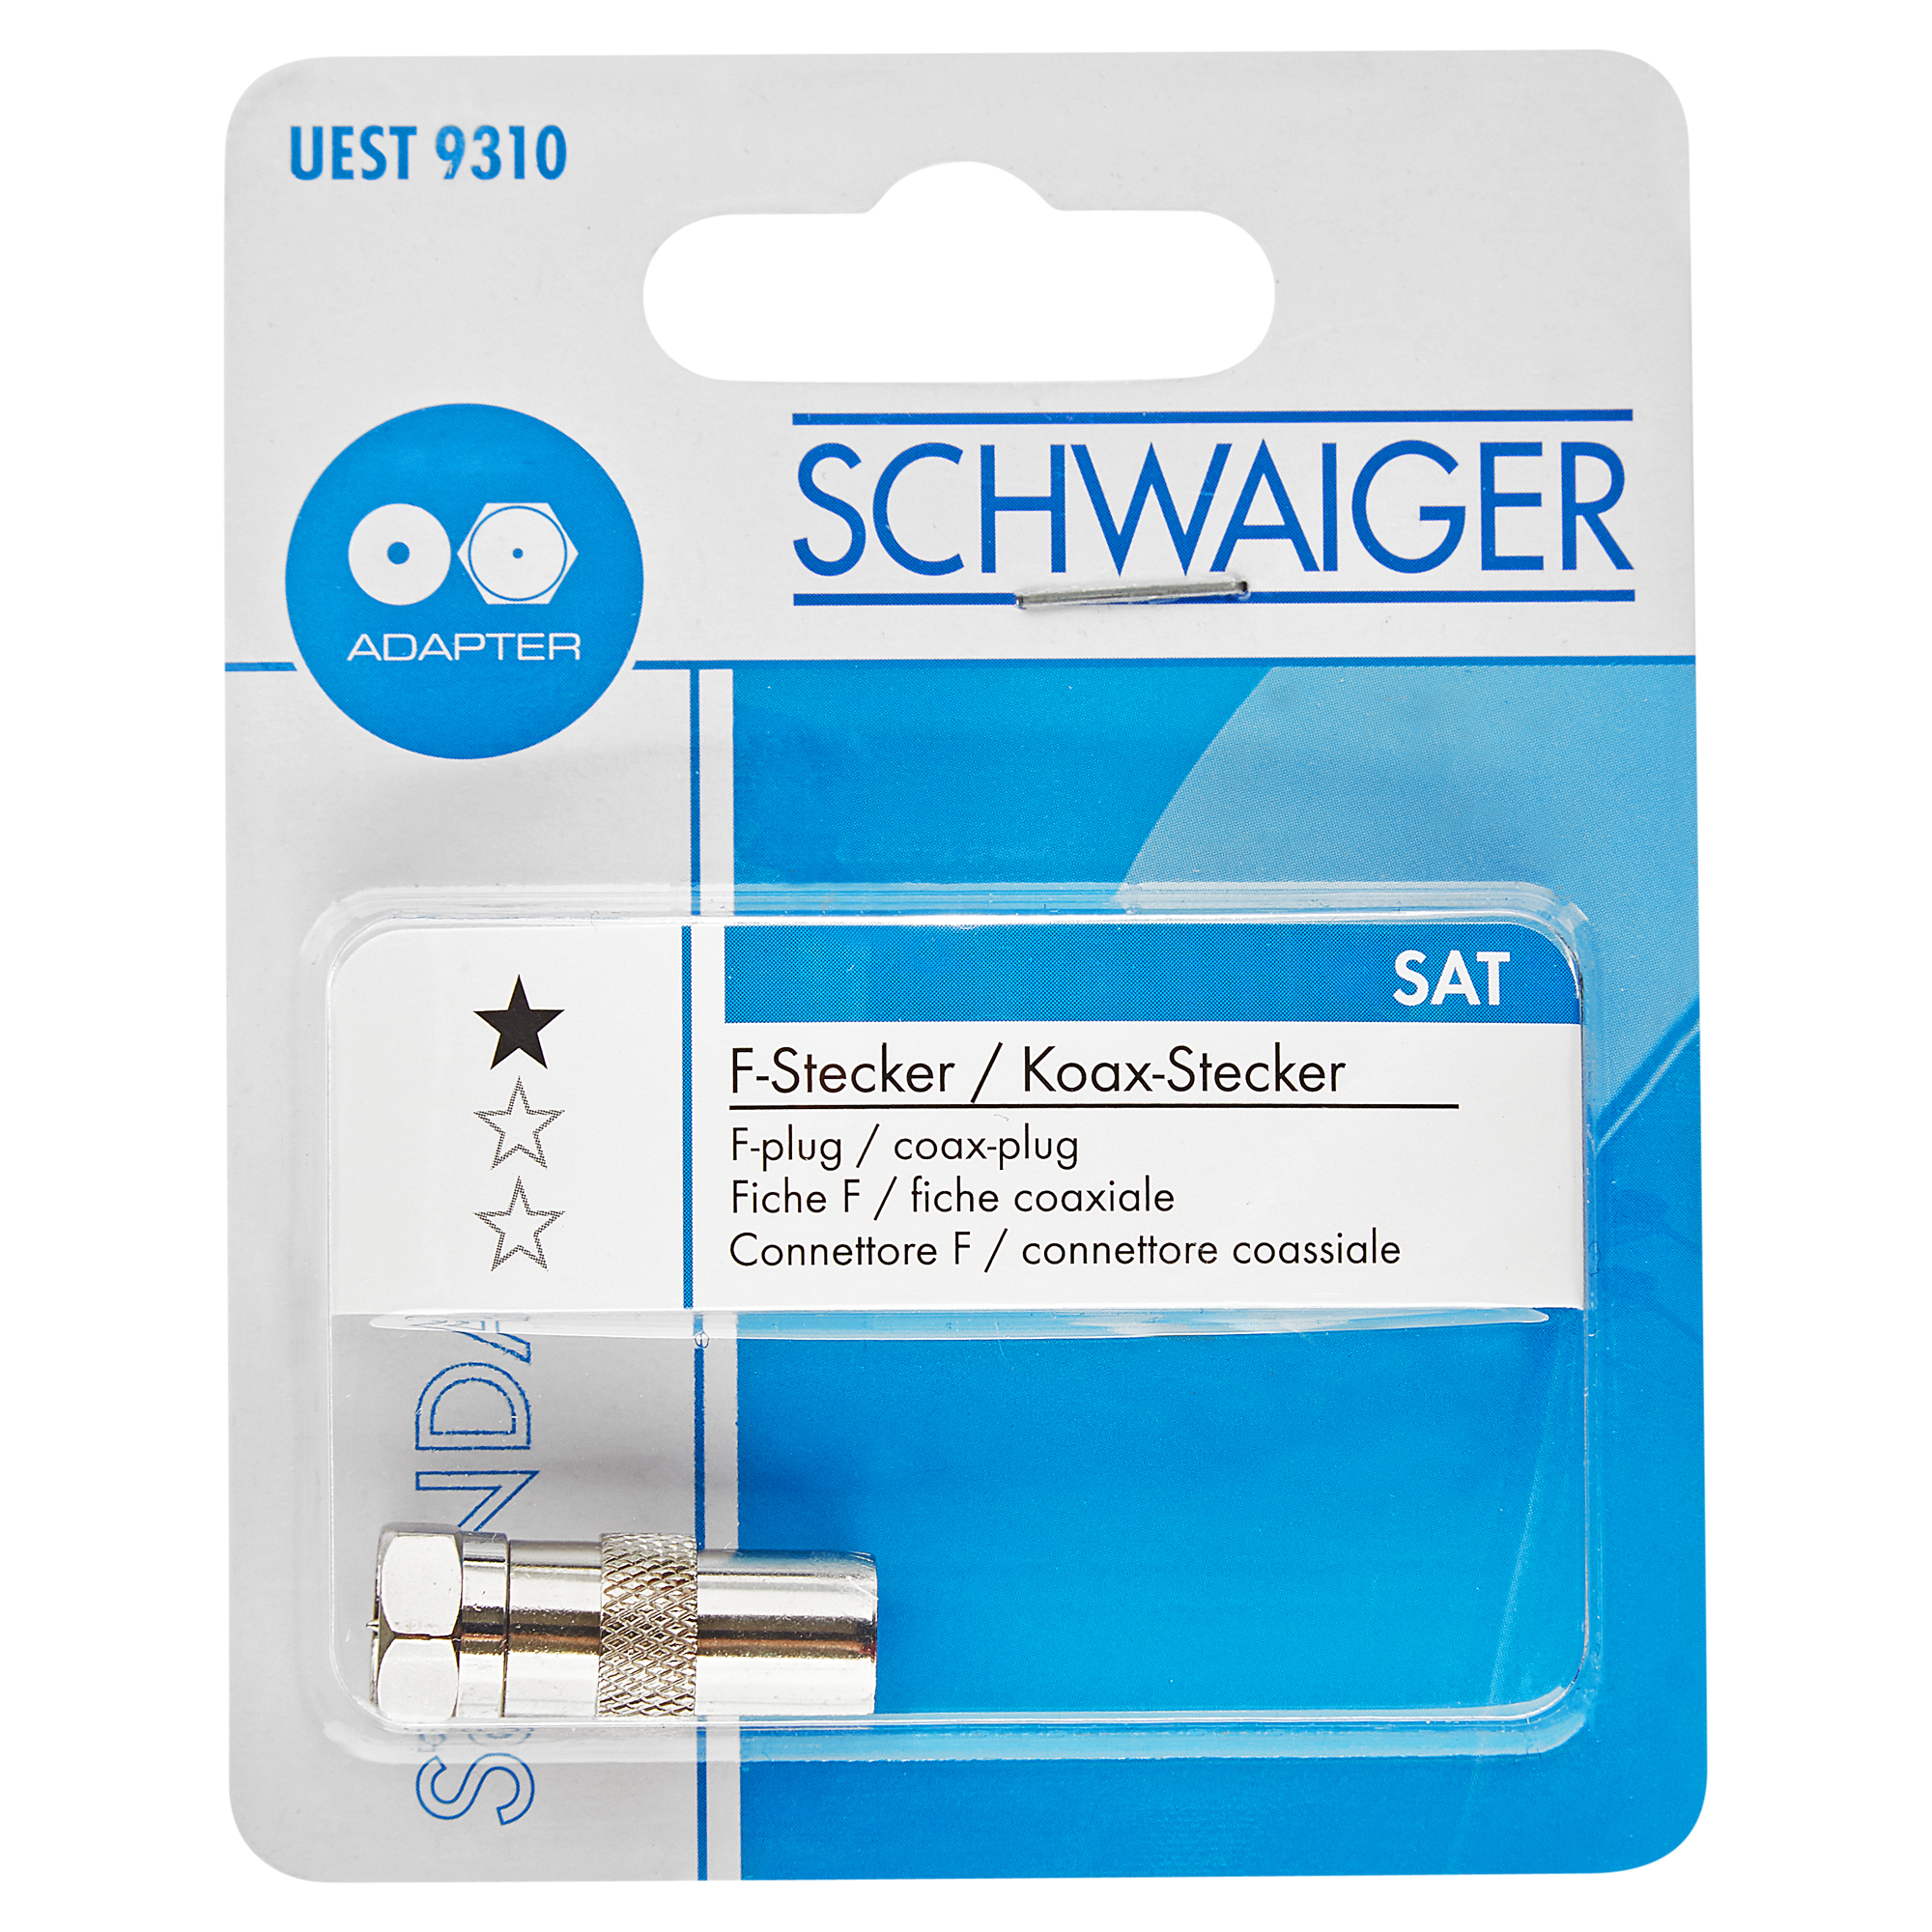 Adapter F-Stecker/IEC-Stecker + product picture